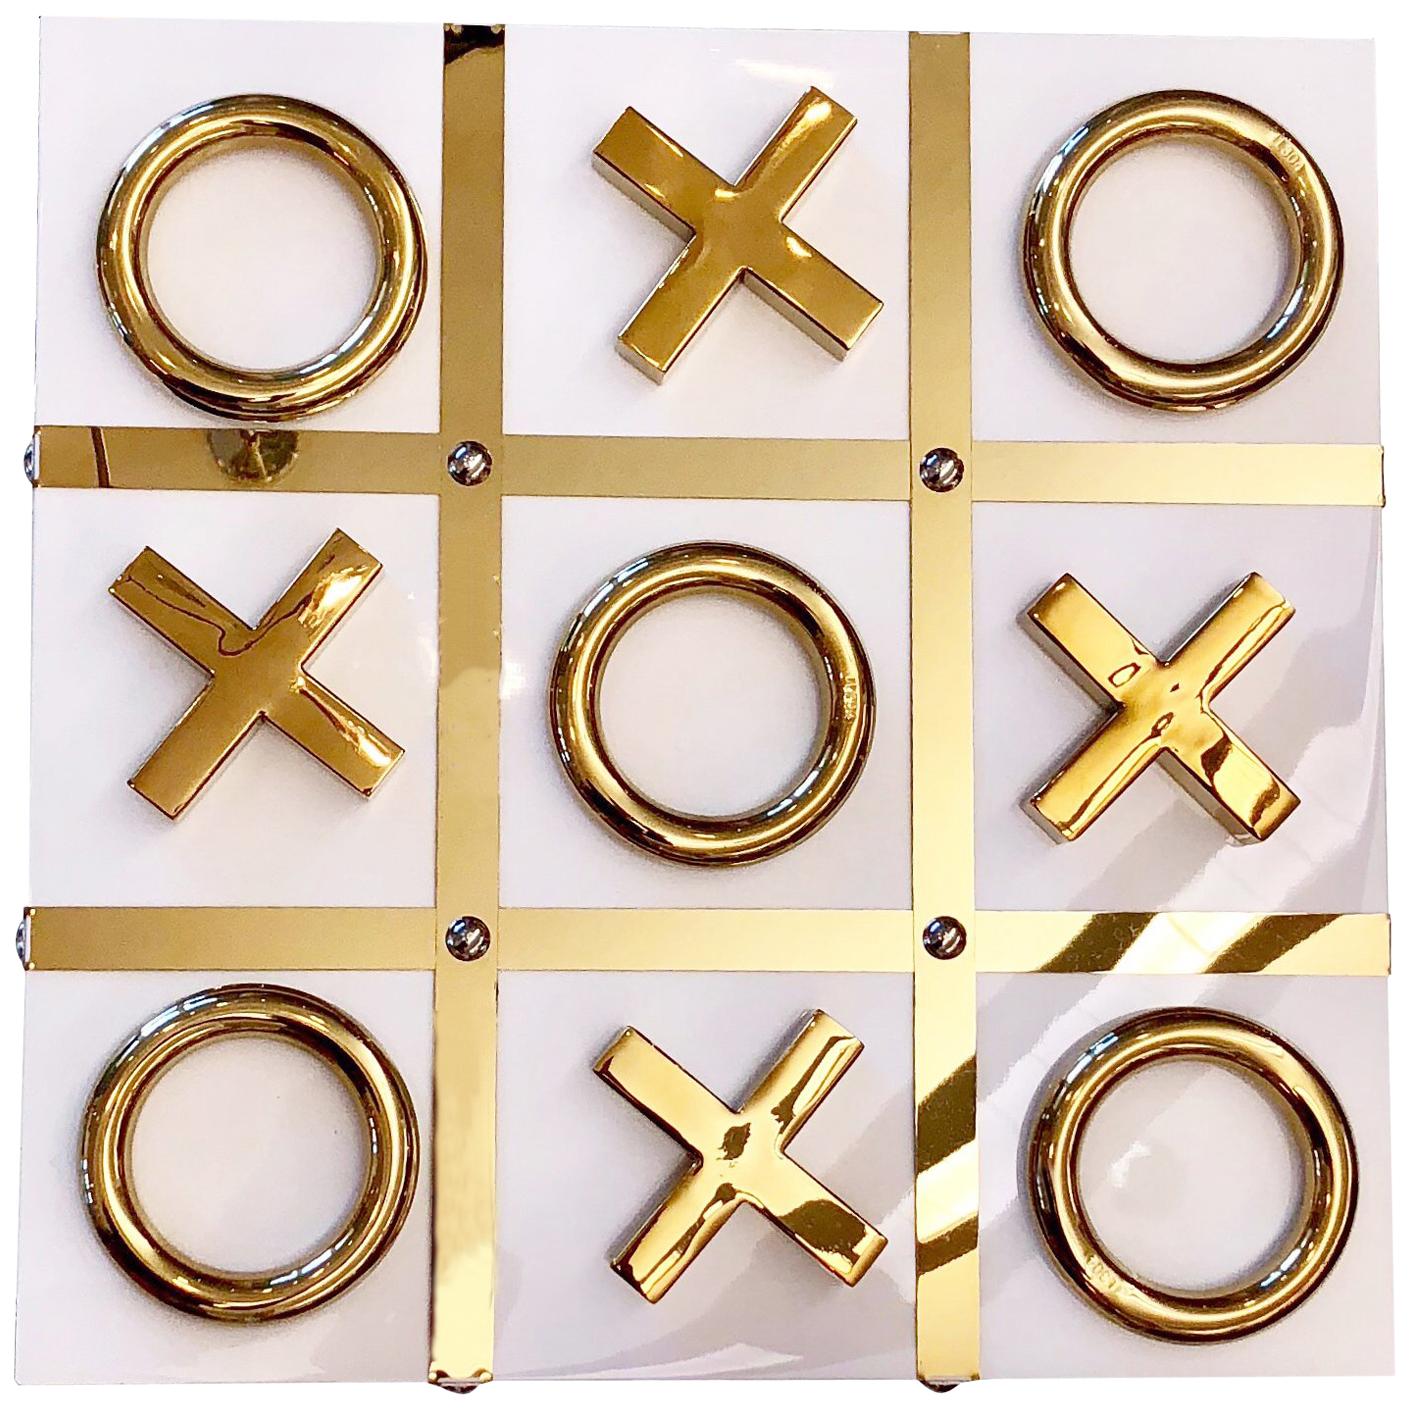 White and Gold Tic Tac Toe Set